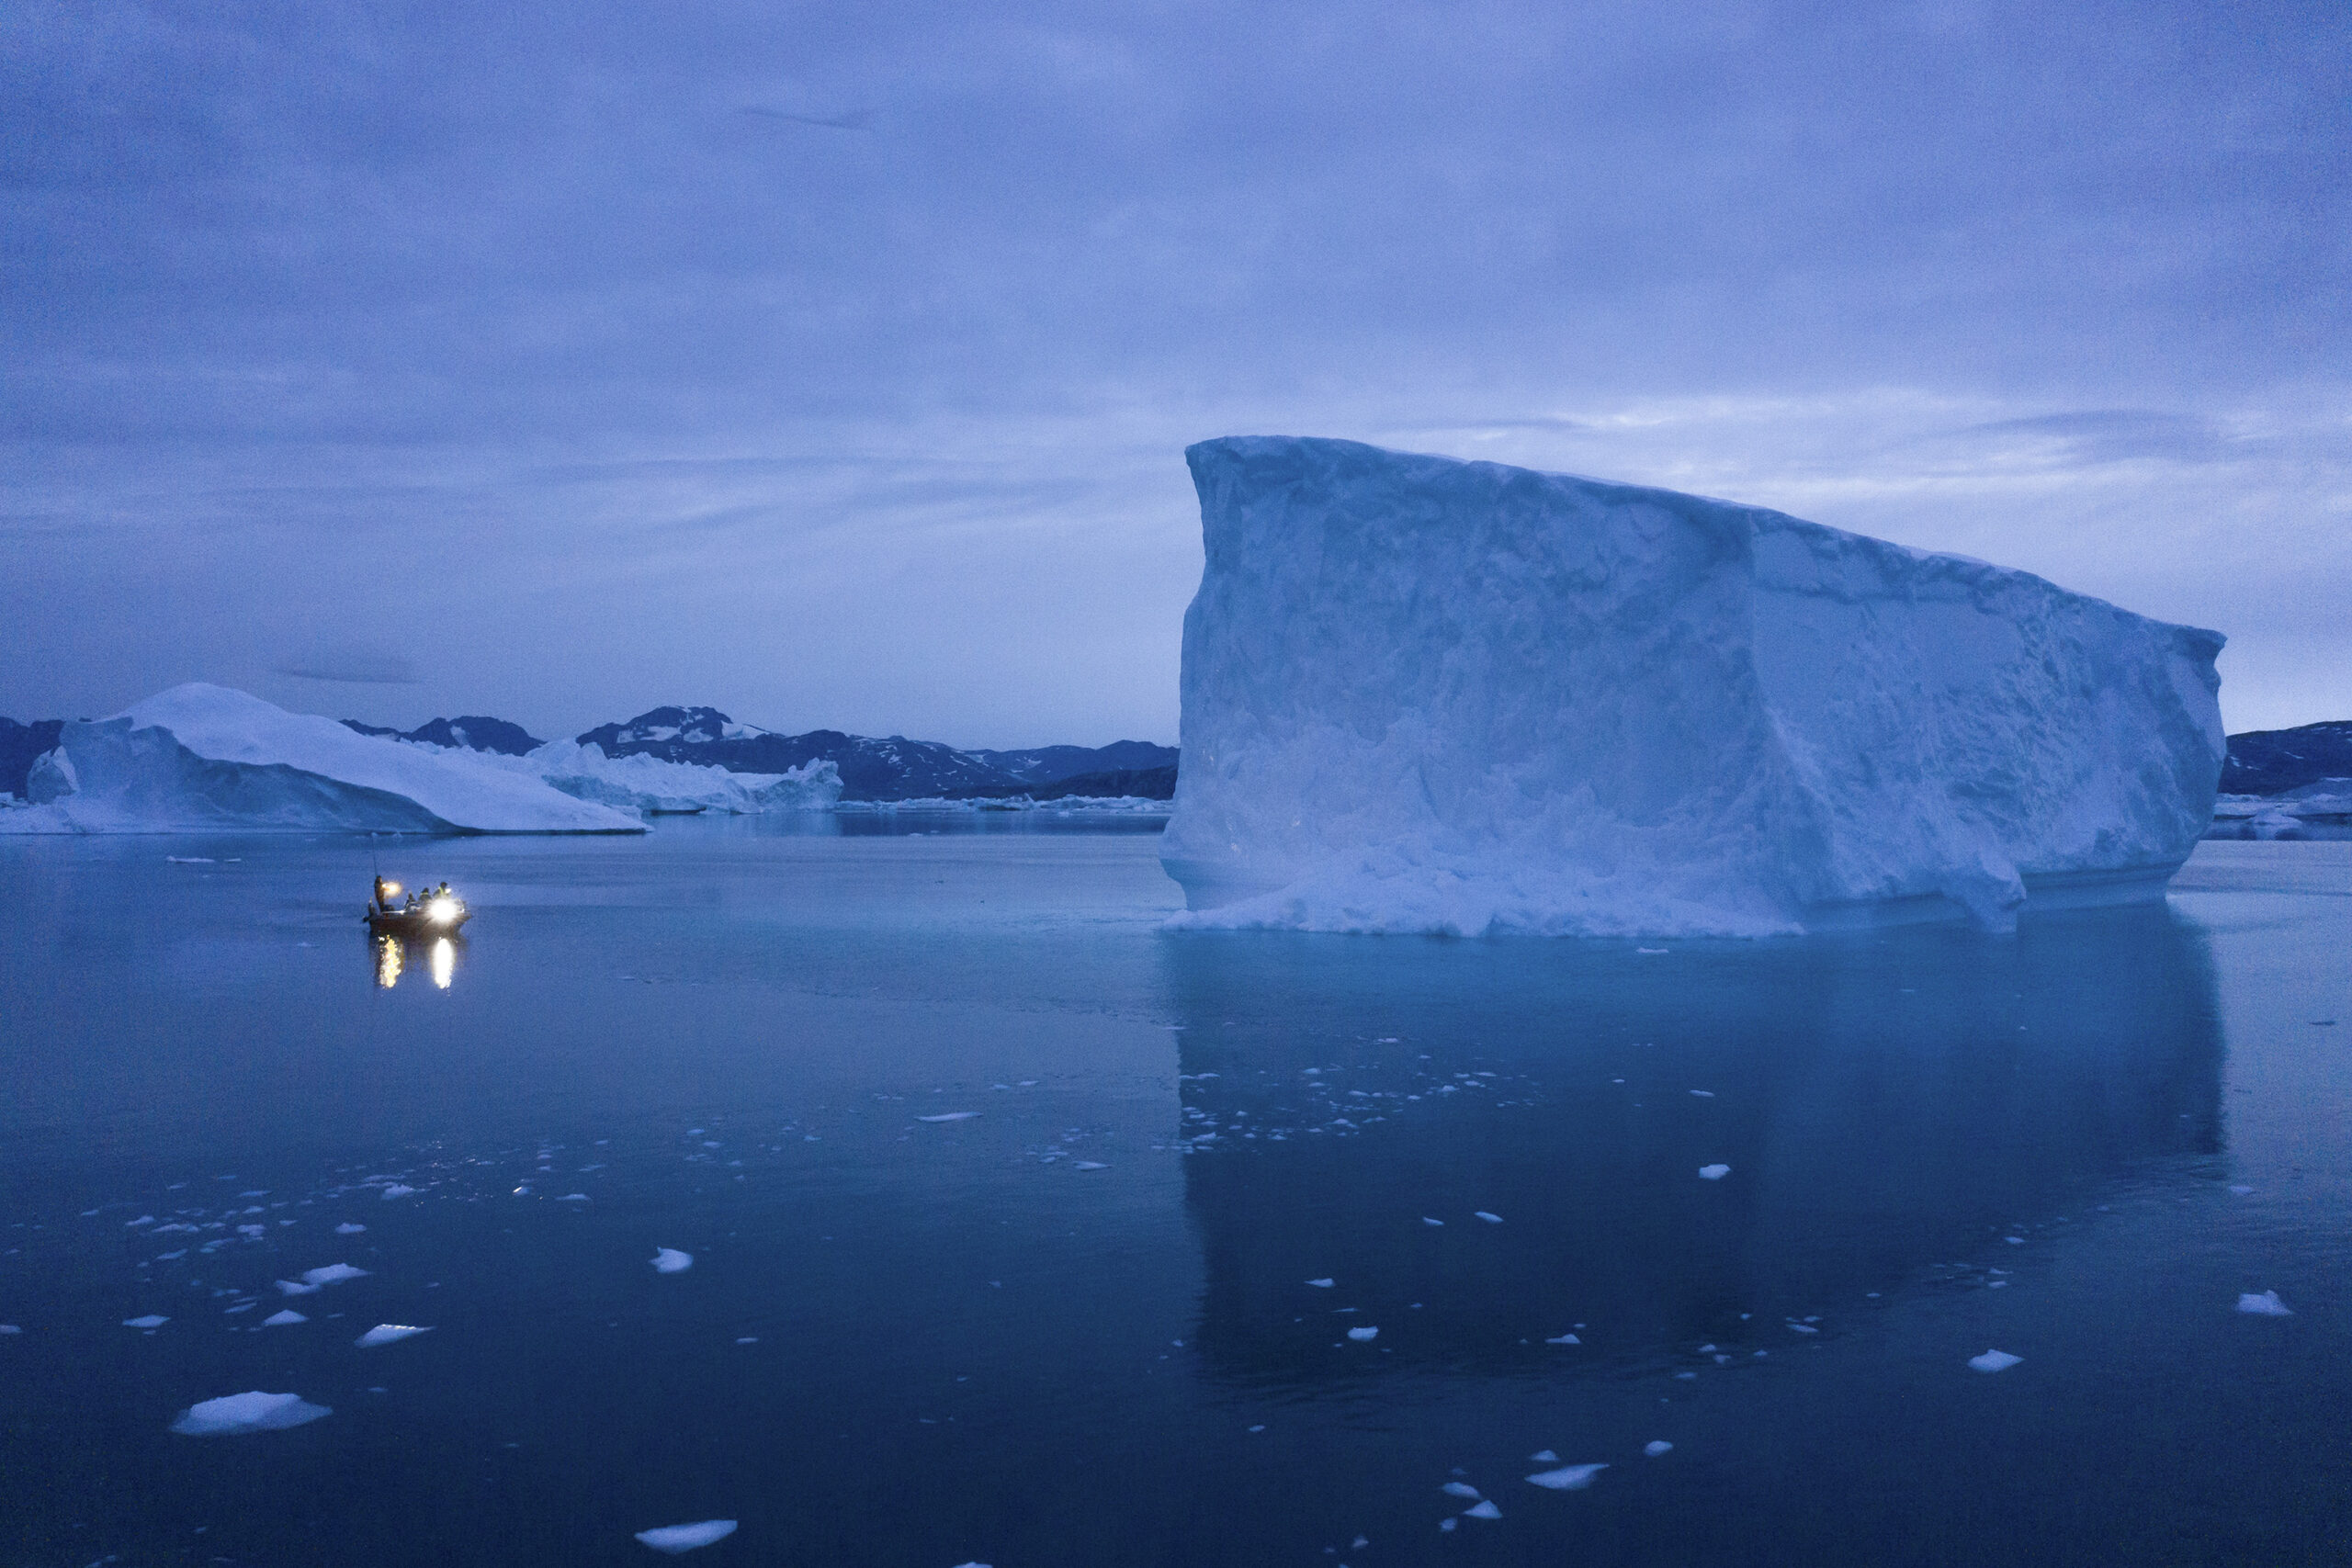 A boat navigates at night next to large icebergs in eastern Greenland.